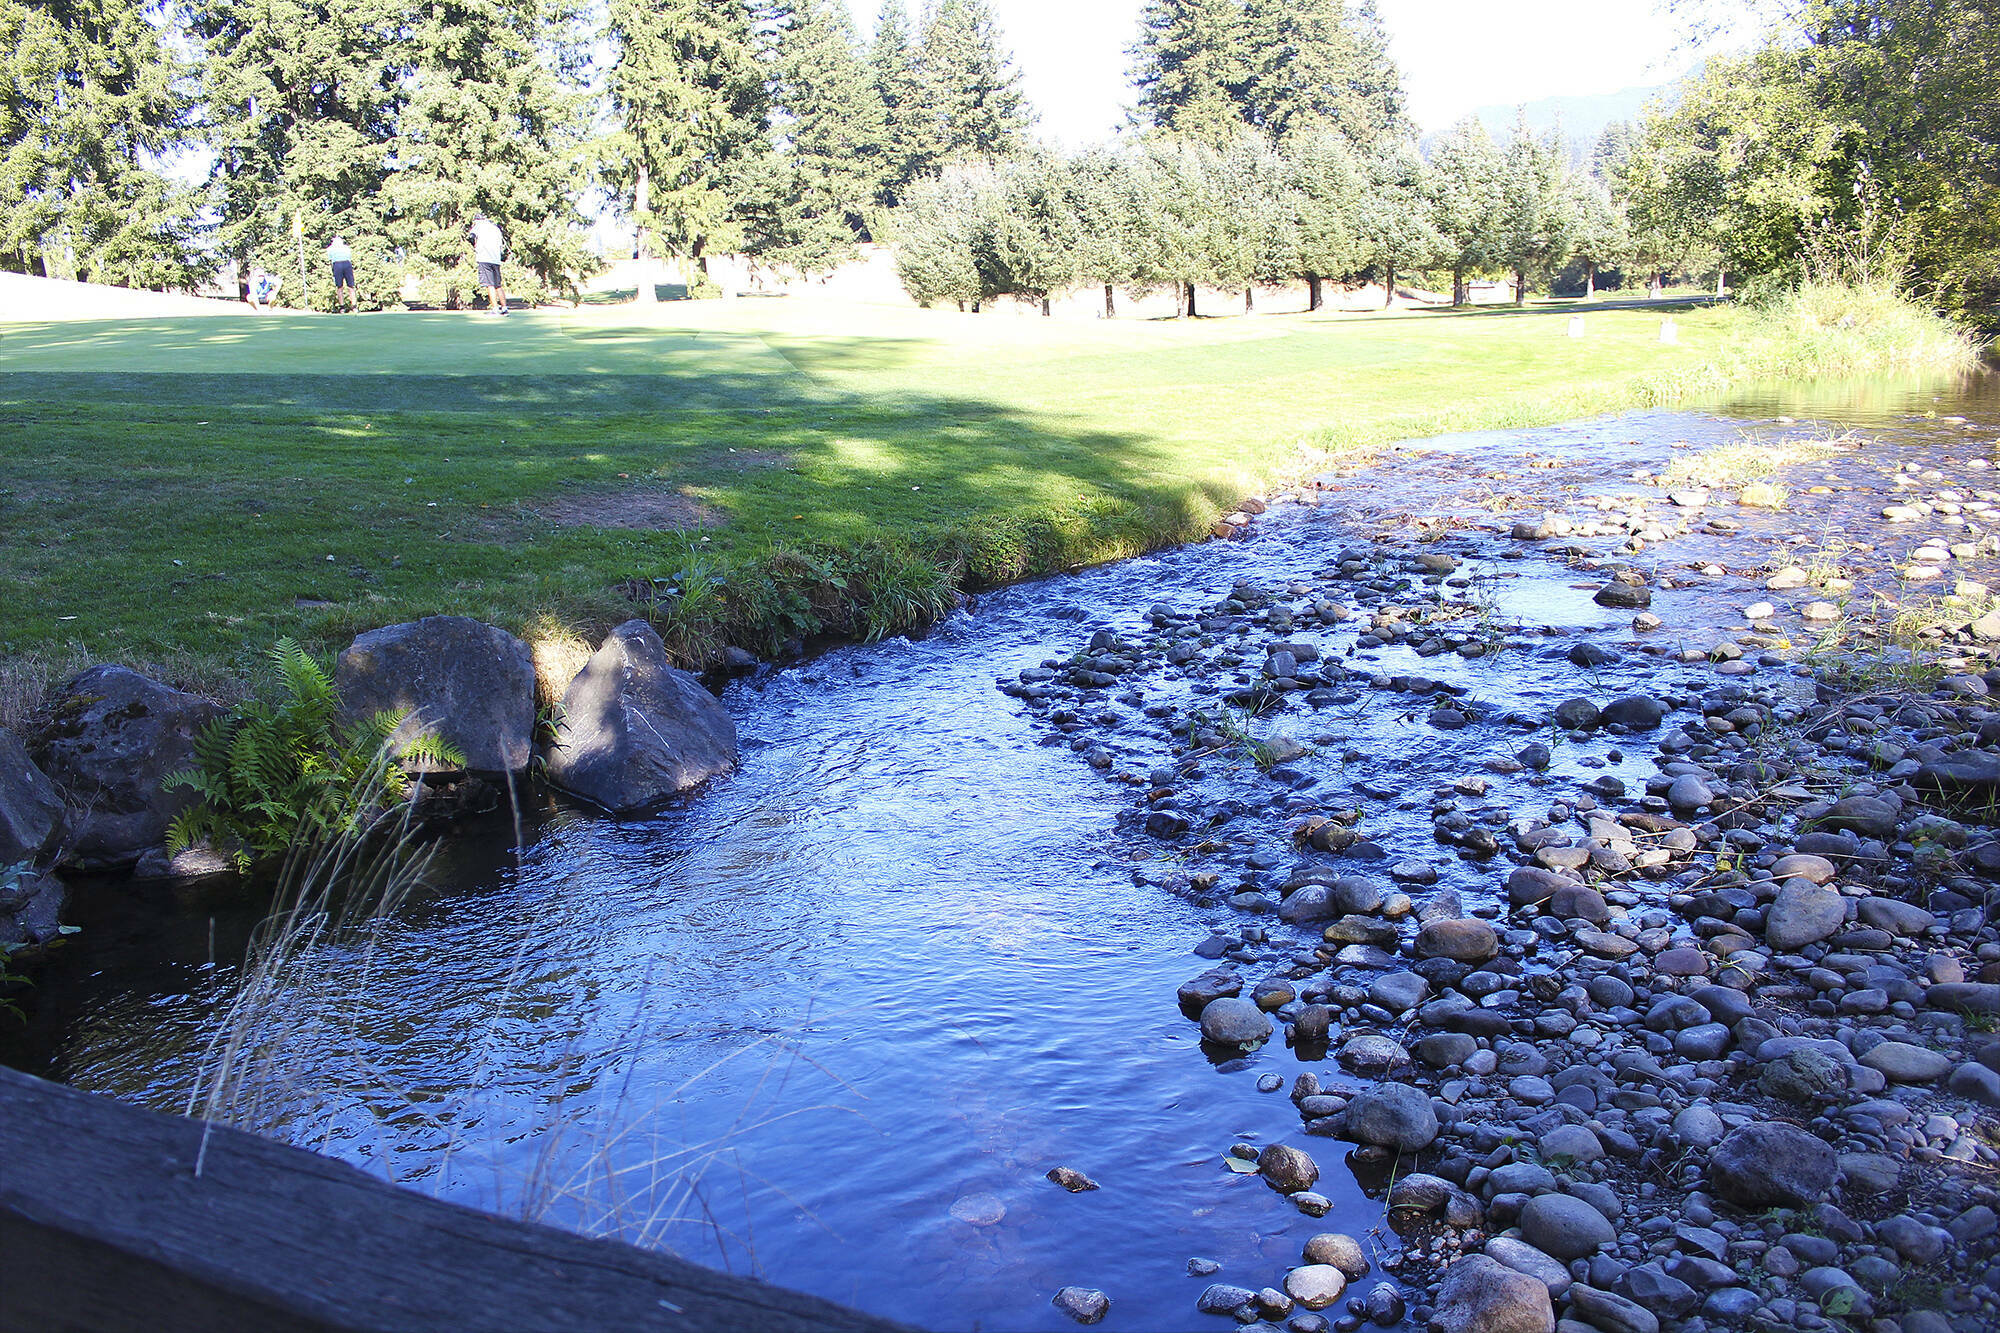 The Boise Creek currently runs through the Enumclaw Golf Course. The city is working on rerouting the creek to prevent annual flooding. Photo by Ray Miller-Still